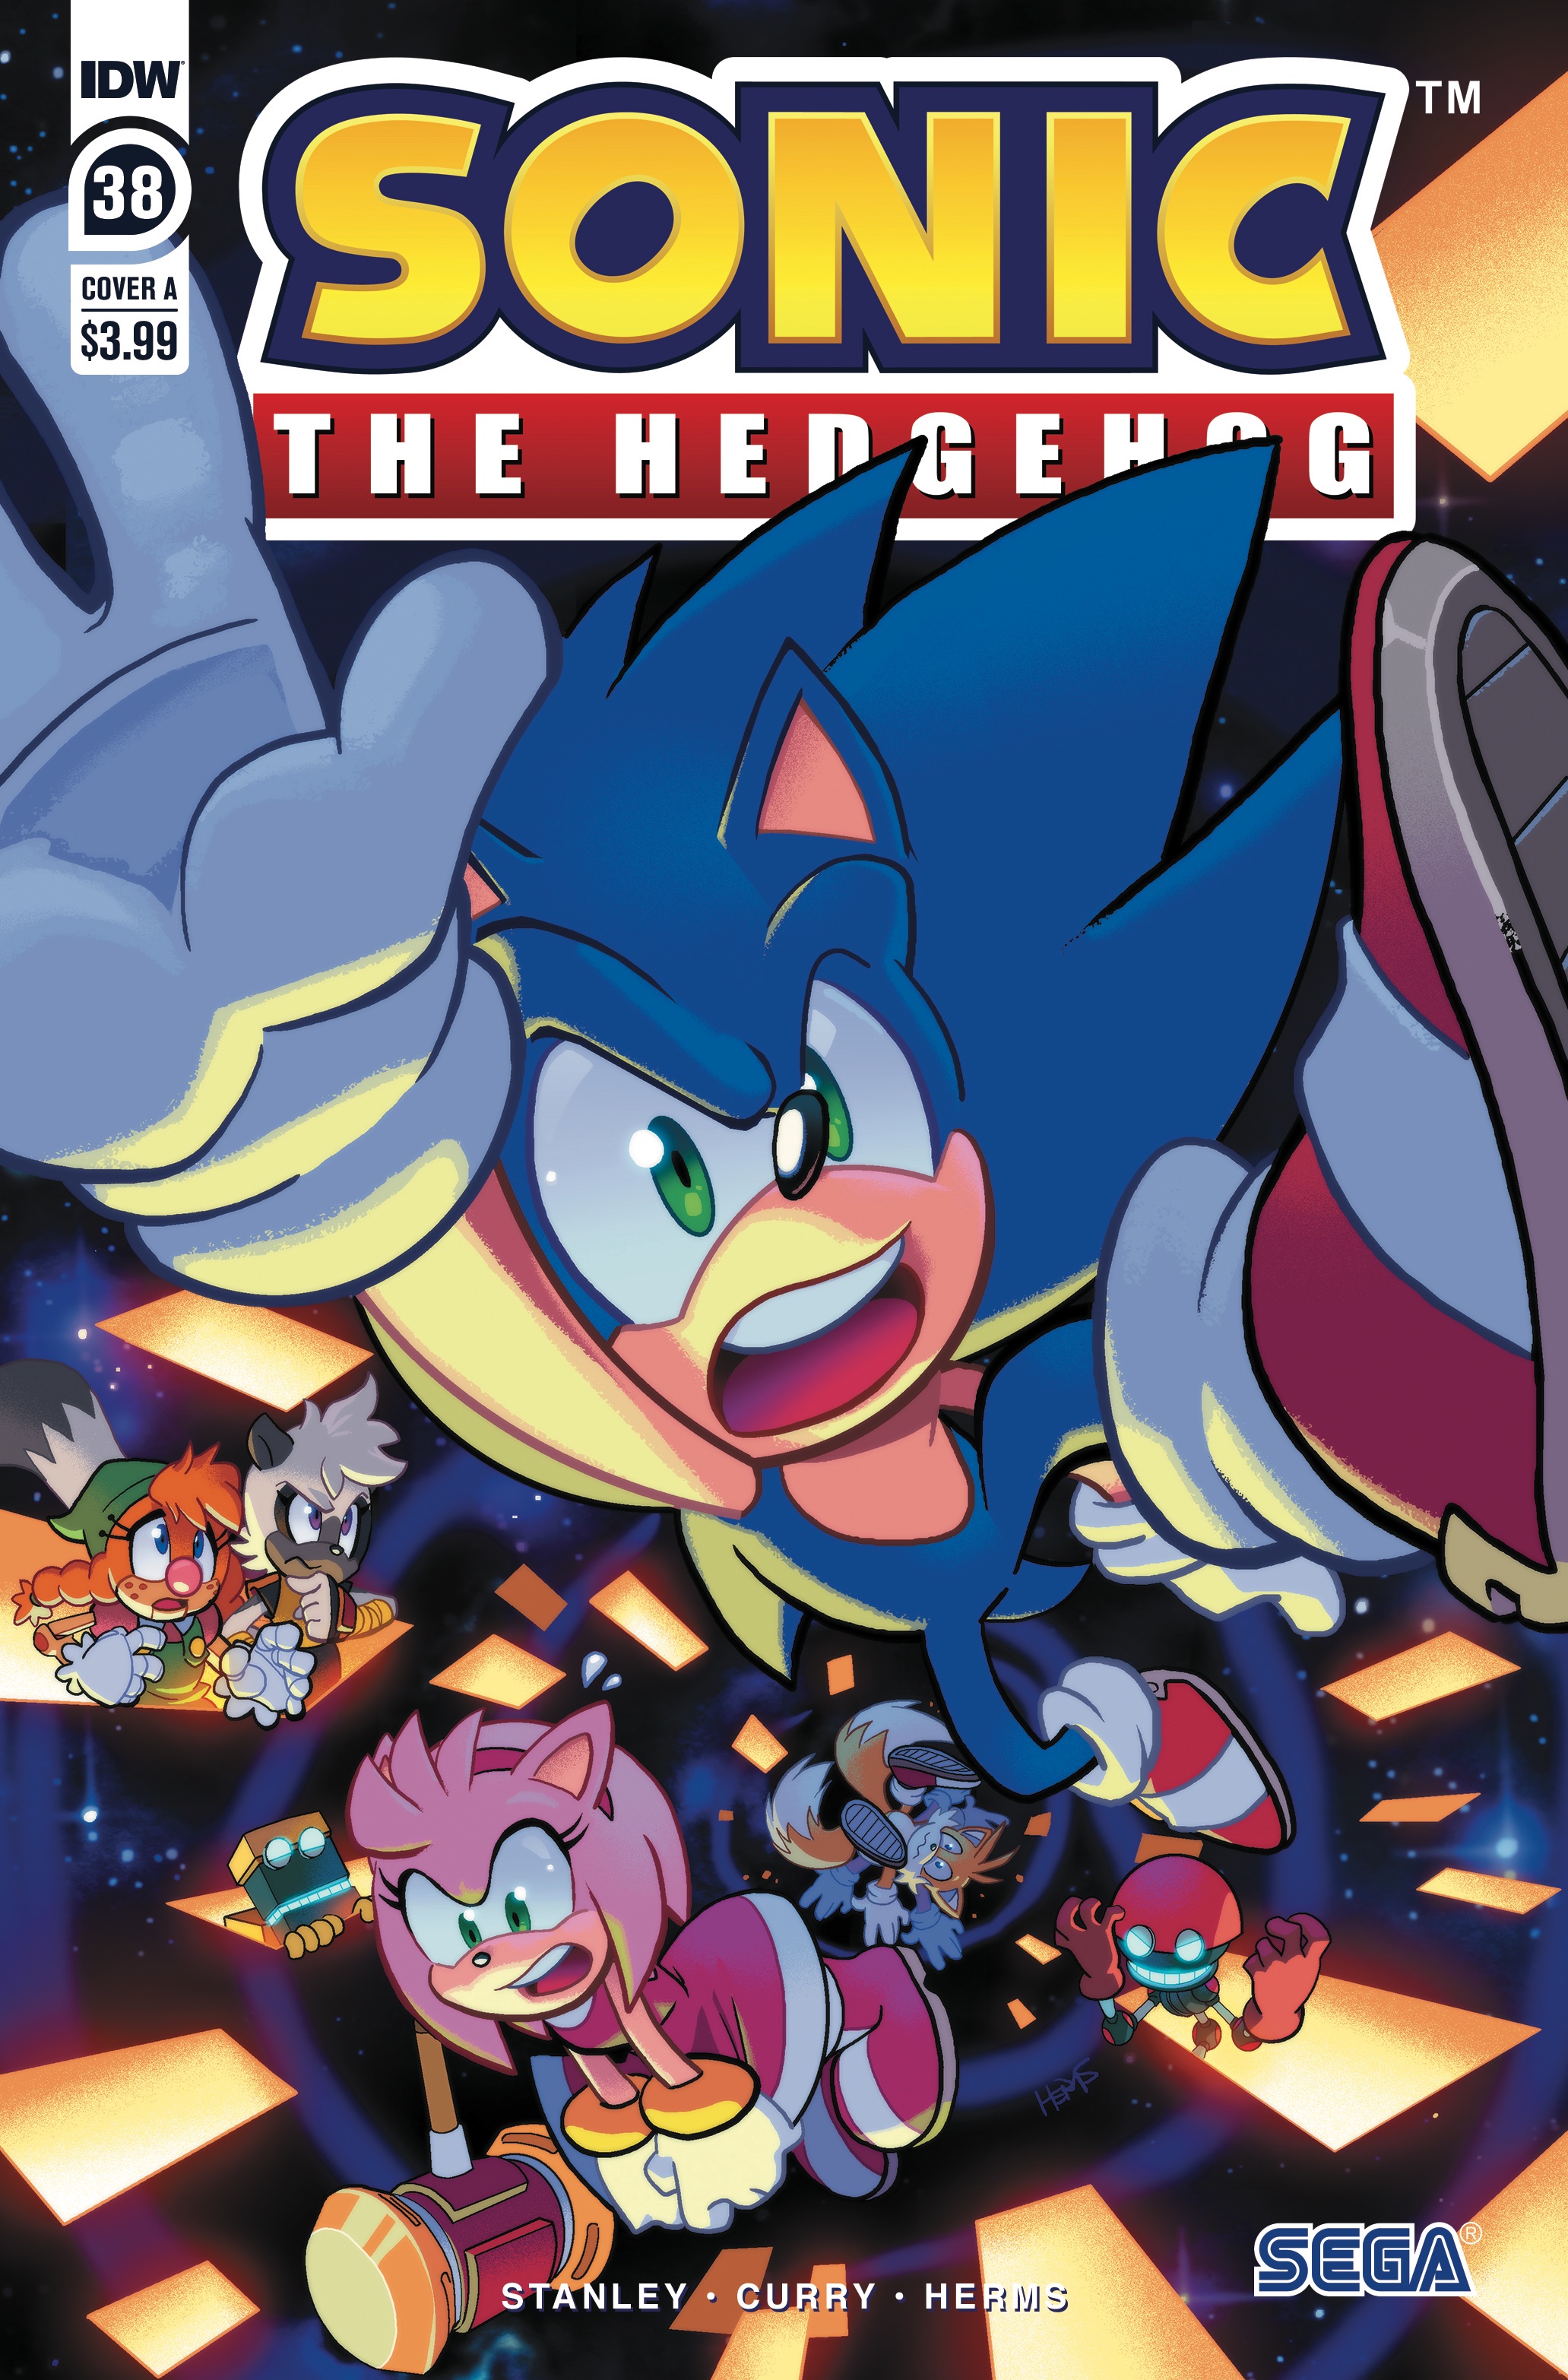 IDW Sonic the Hedgehog Issue 52, Wiki Sonic IDW News